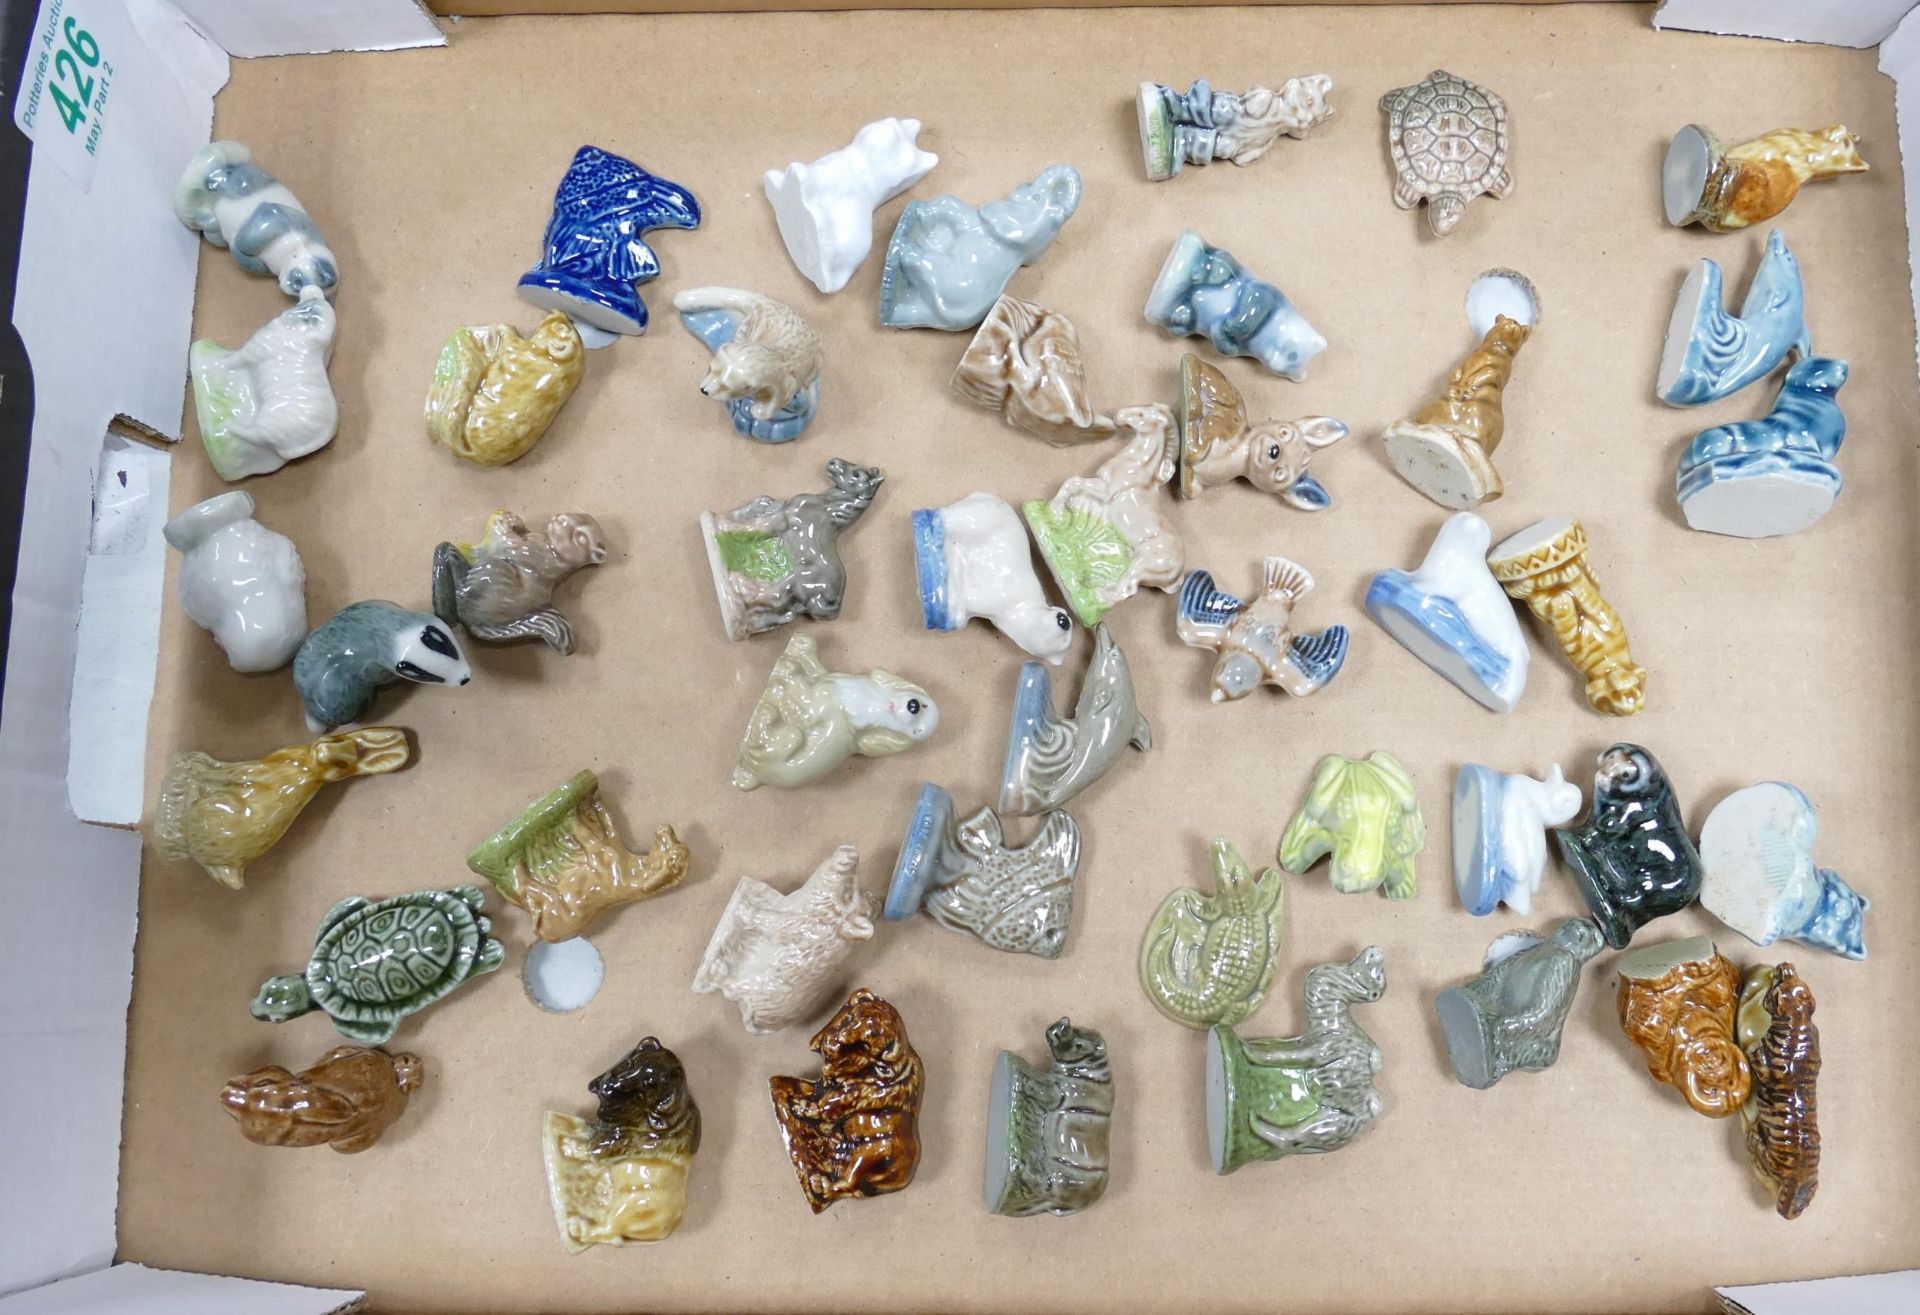 A collection of wade whimsies to include badger, fish, frog, owl, etc (1 tray)